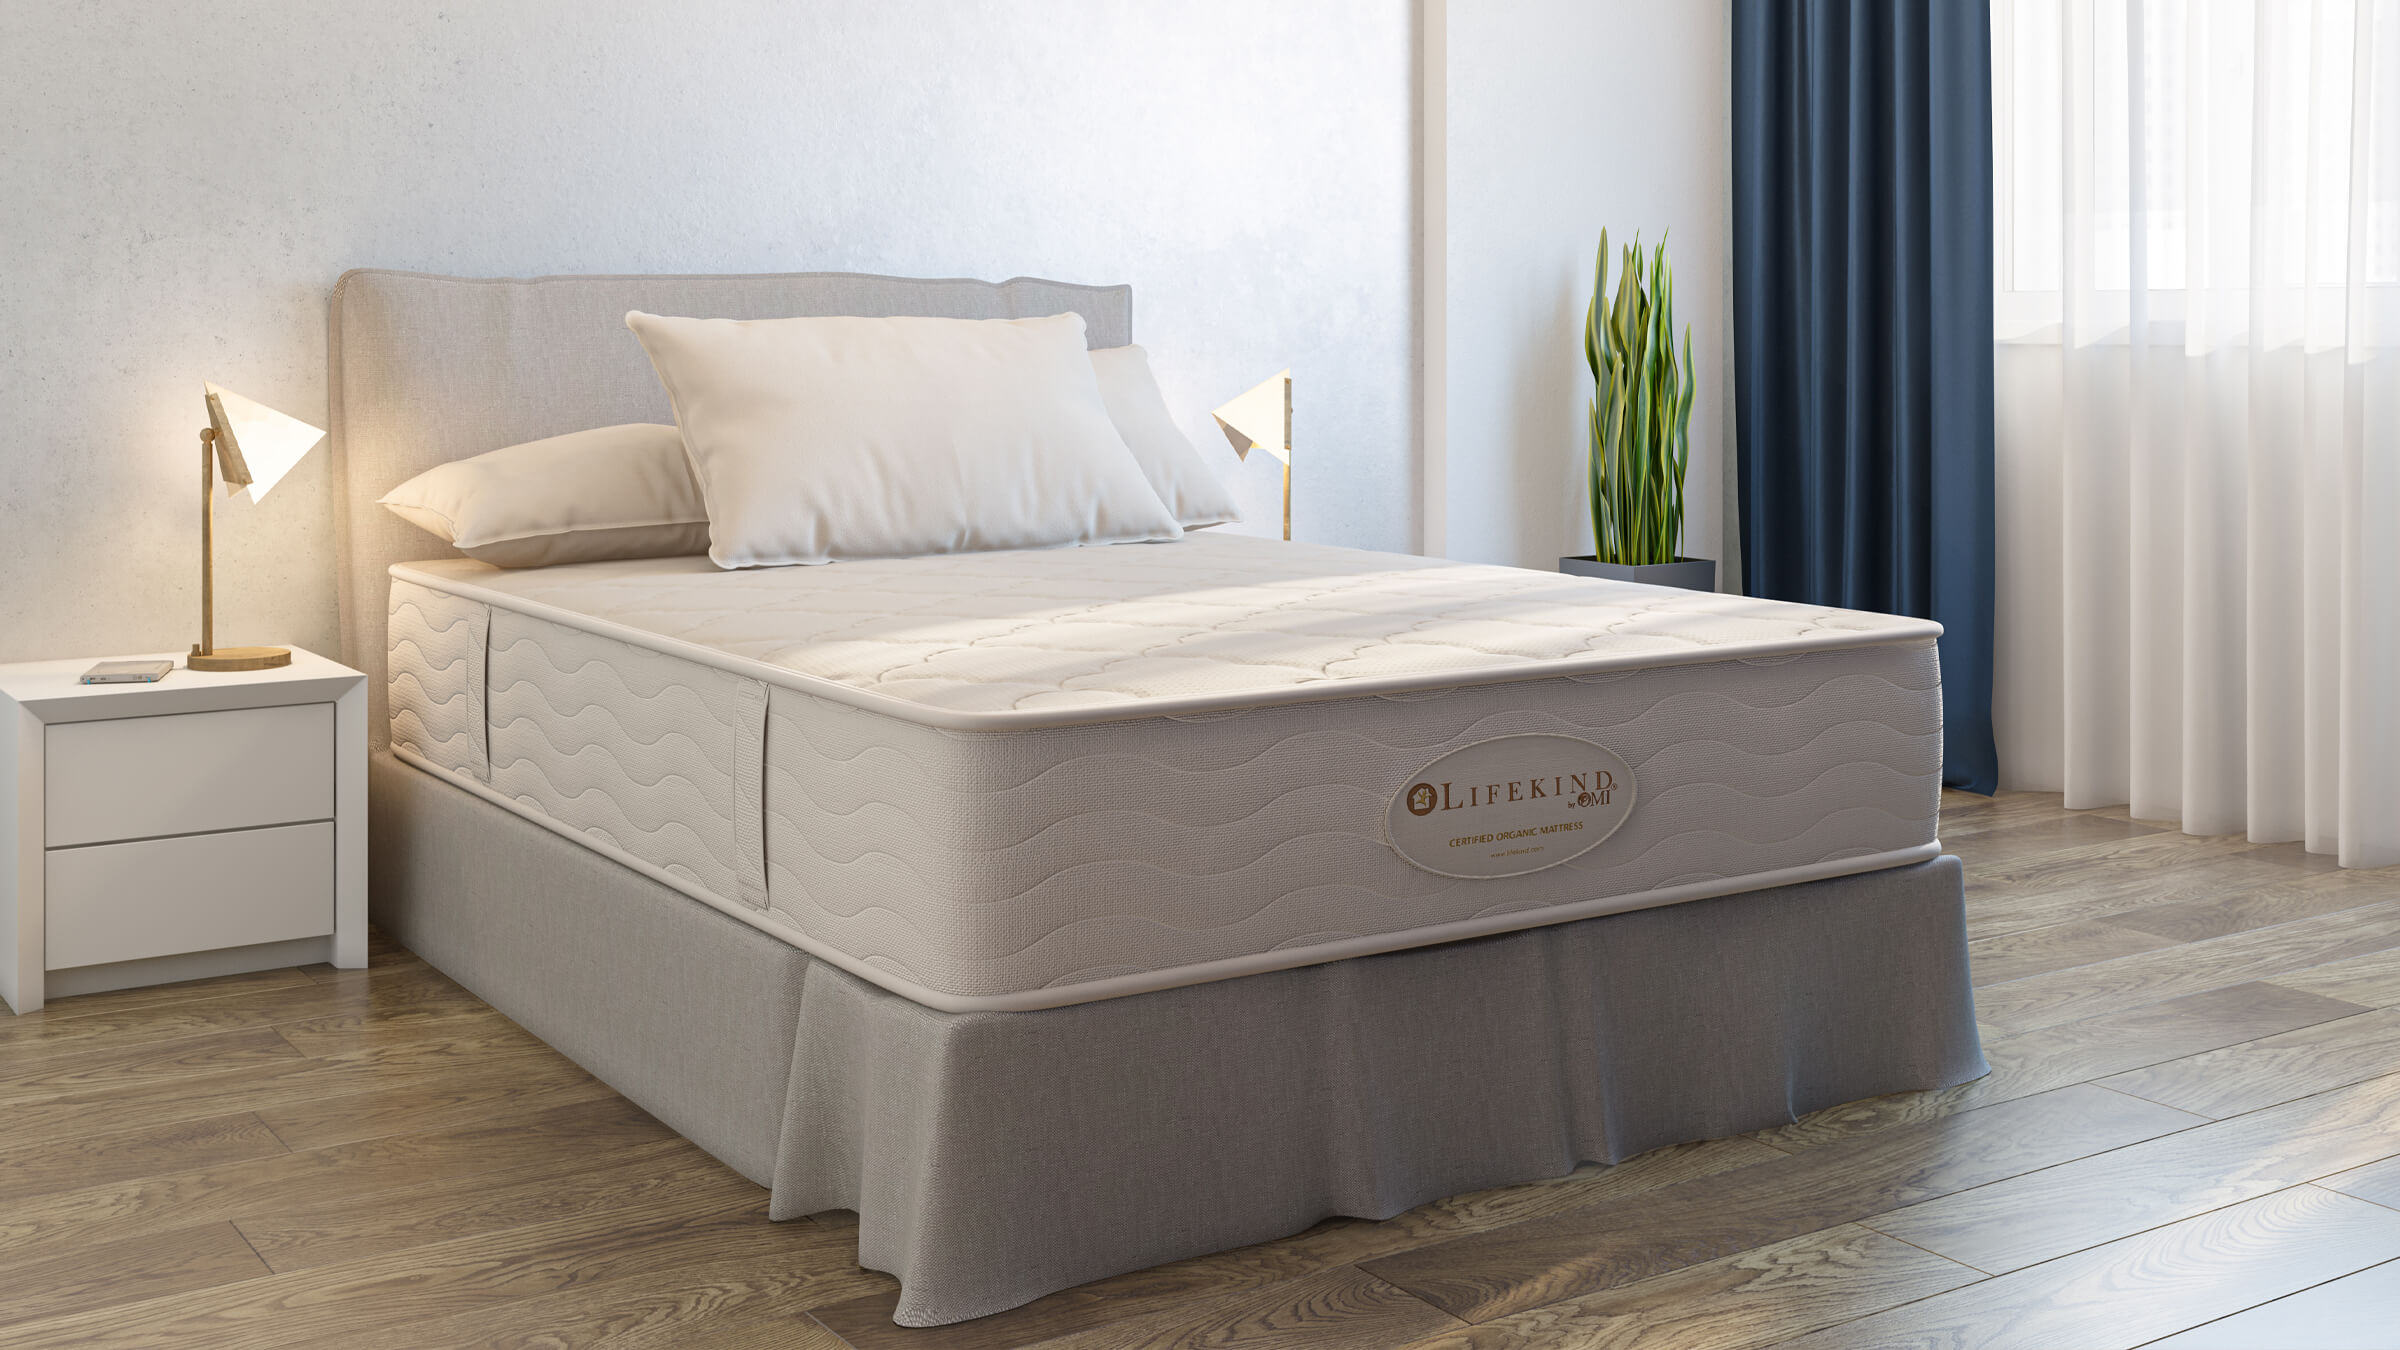 CG Image of a Mattress in Real-Life Context